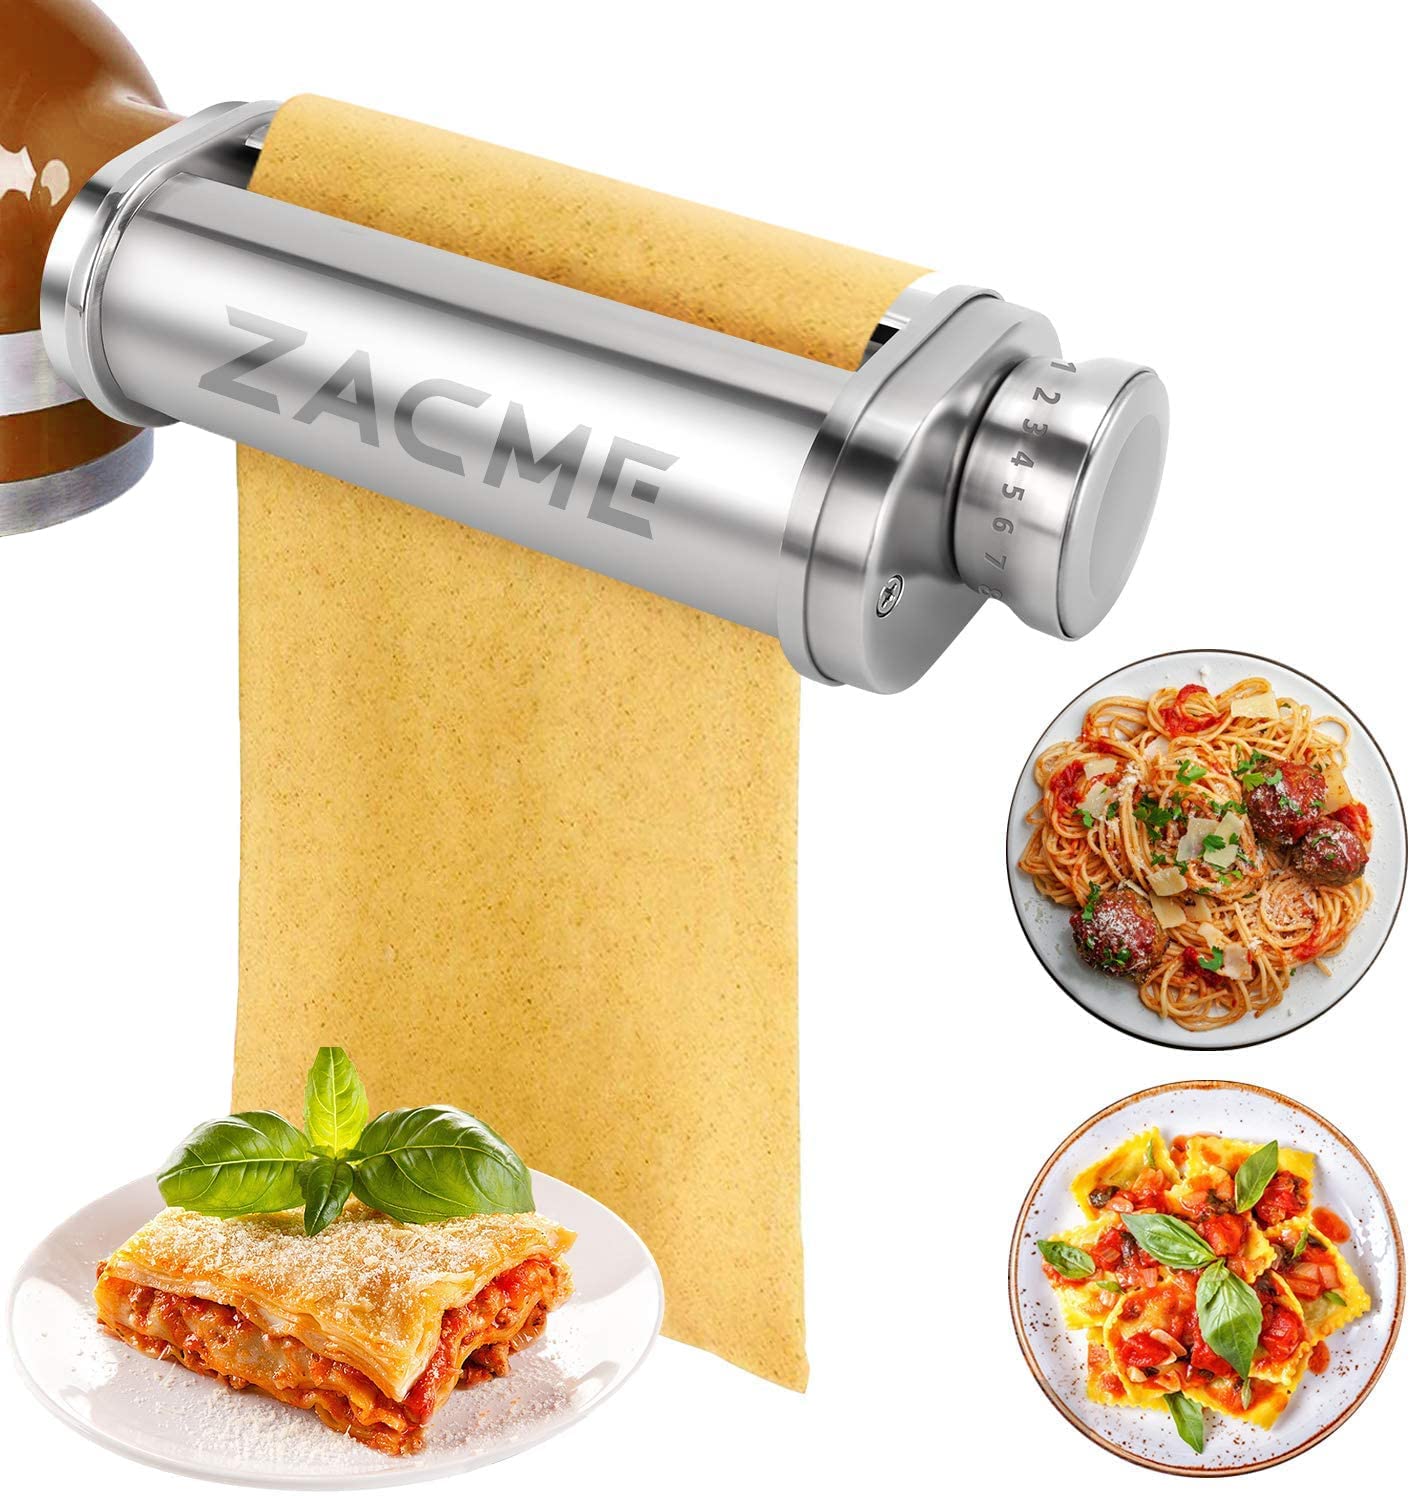 Airpro r Attachment, Zacme 3-in-1 Pasta Roller & Cutter Attachments Set for KitchenAid Stand Mixers, Including Durable Pasta Sheet Roller, Spaghetti Cutter, Fettuc